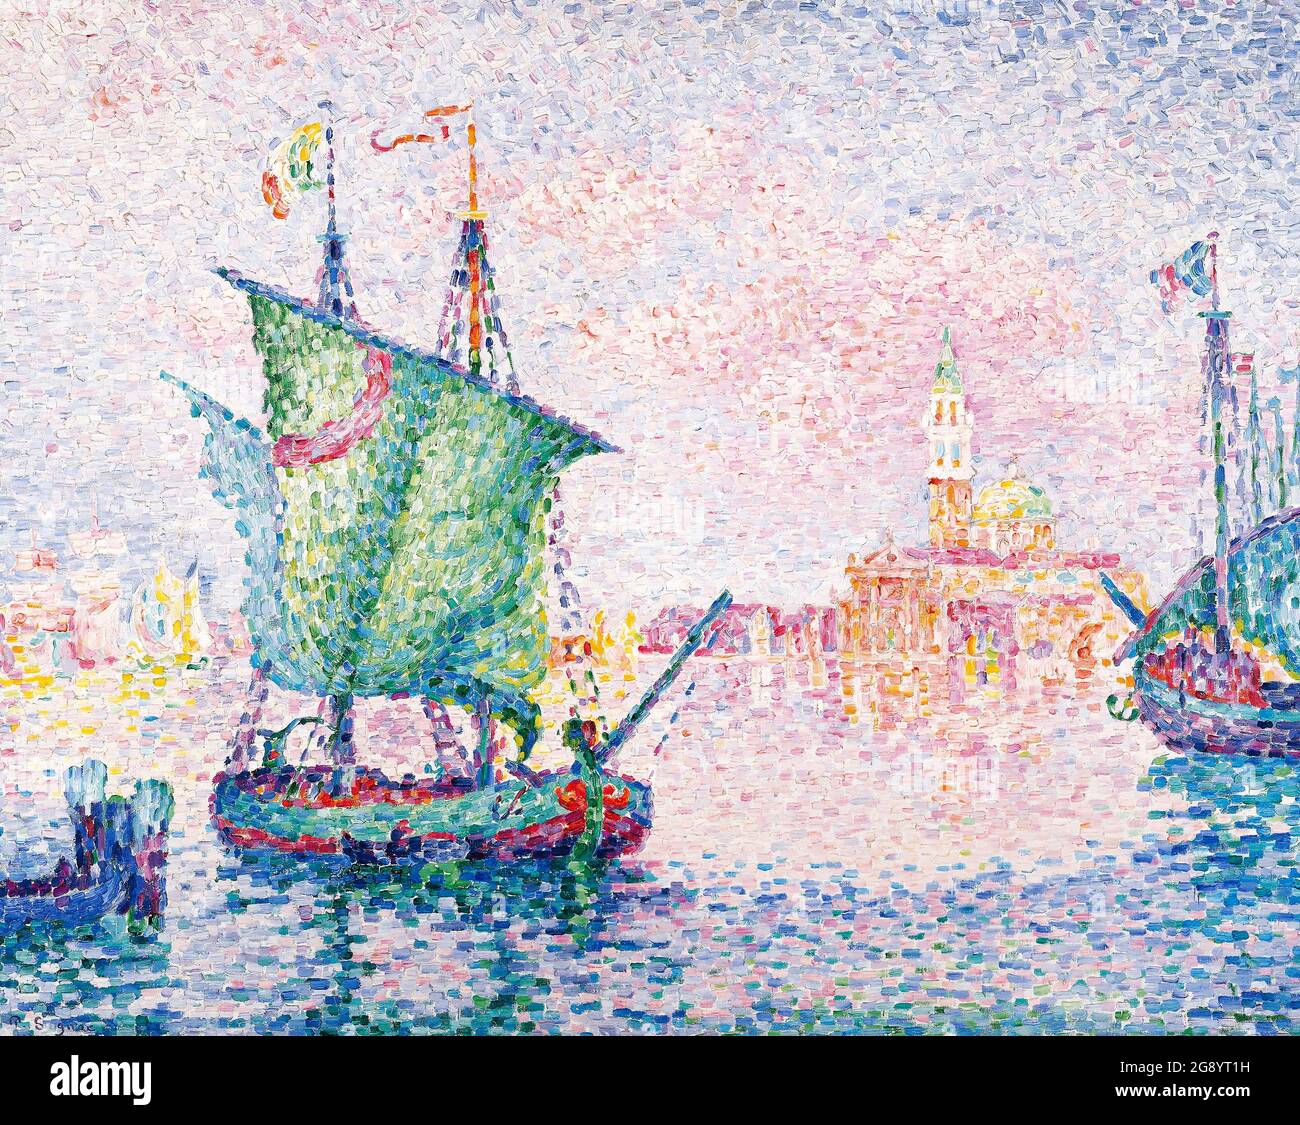 Venice, The Pink Cloud, 1909 by Paul Signac (1863-1935), oil on canvas, 1909 Stock Photo